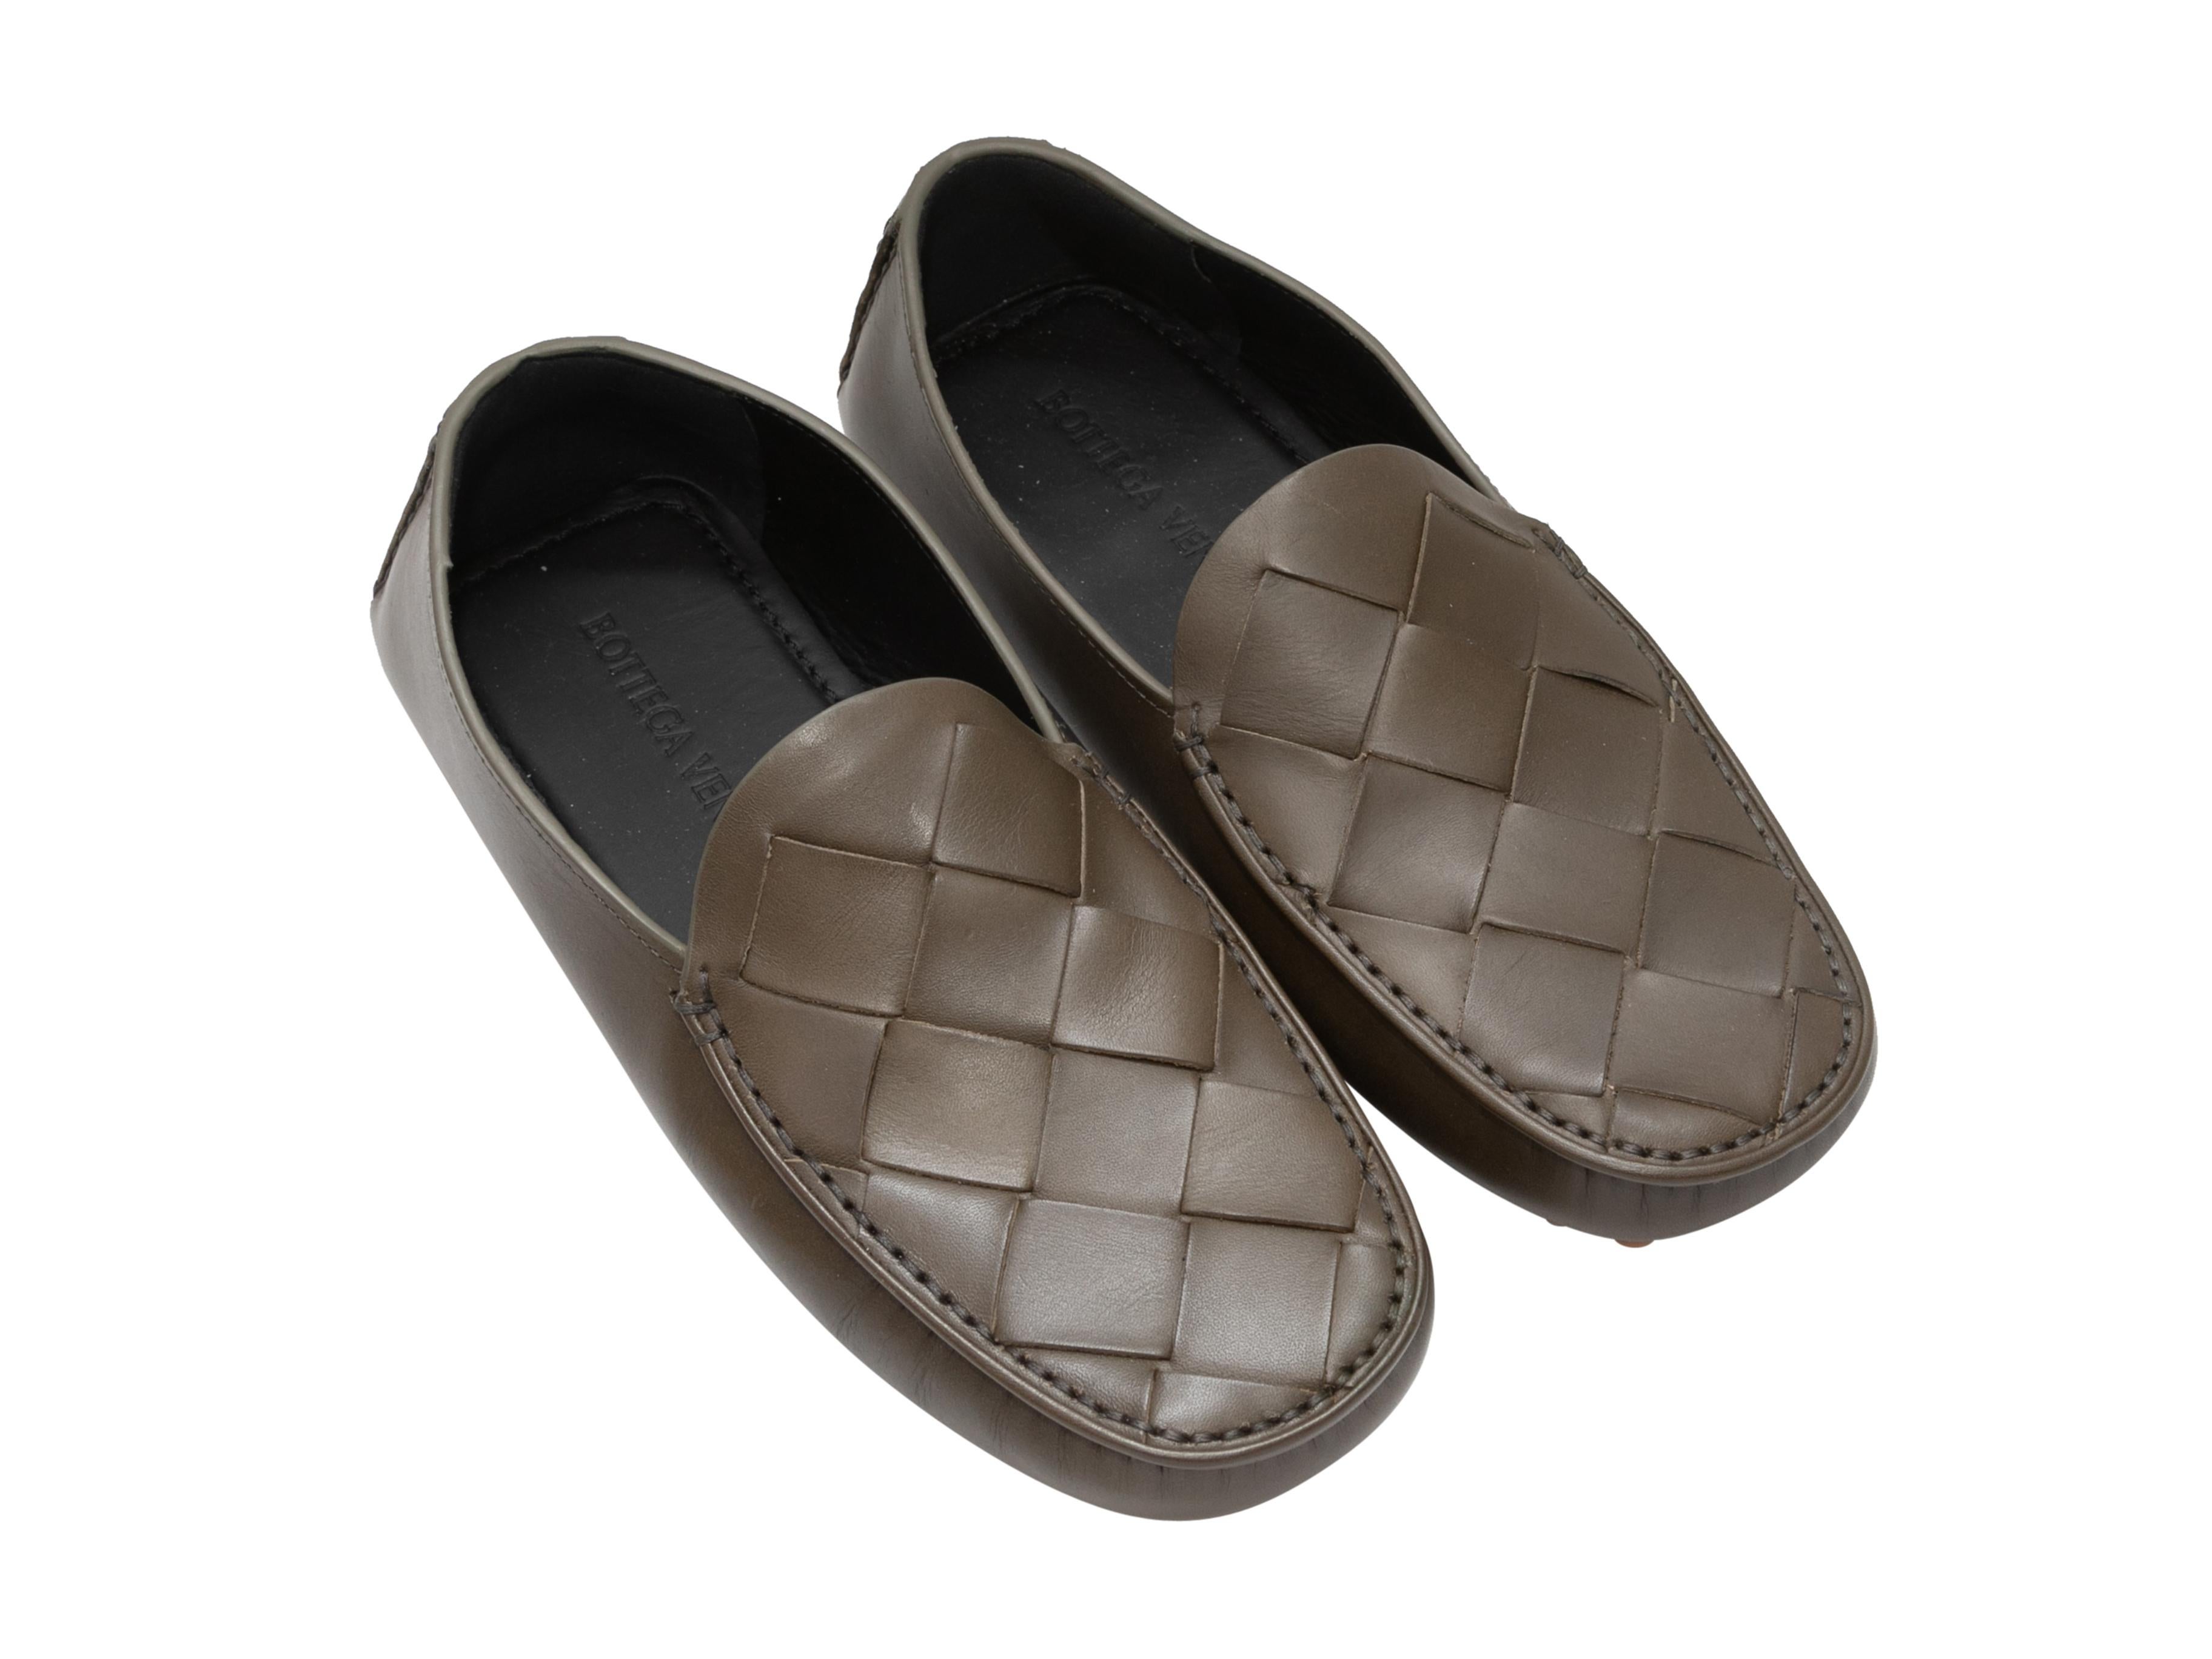 Olive Intrecciato leather driving loafers by Bottega Veneta. Rubber bumpers at counters and at soles.